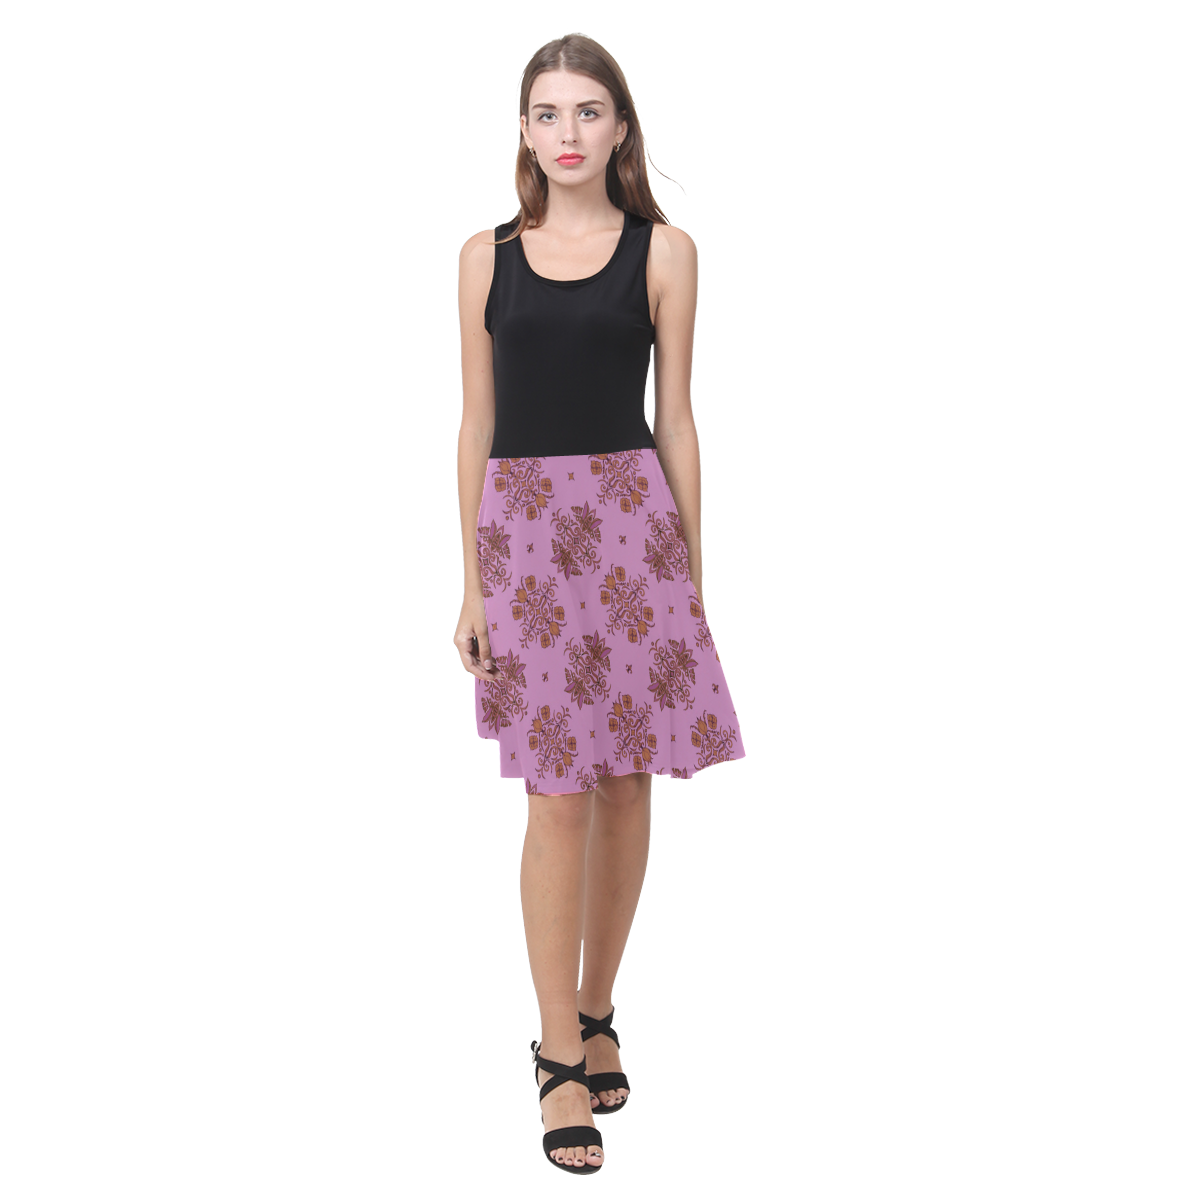 Rich Lavender and Gold Wall Flower Print with Black Bodice by Aleta Atalanta Casual Sundress(Model D04)